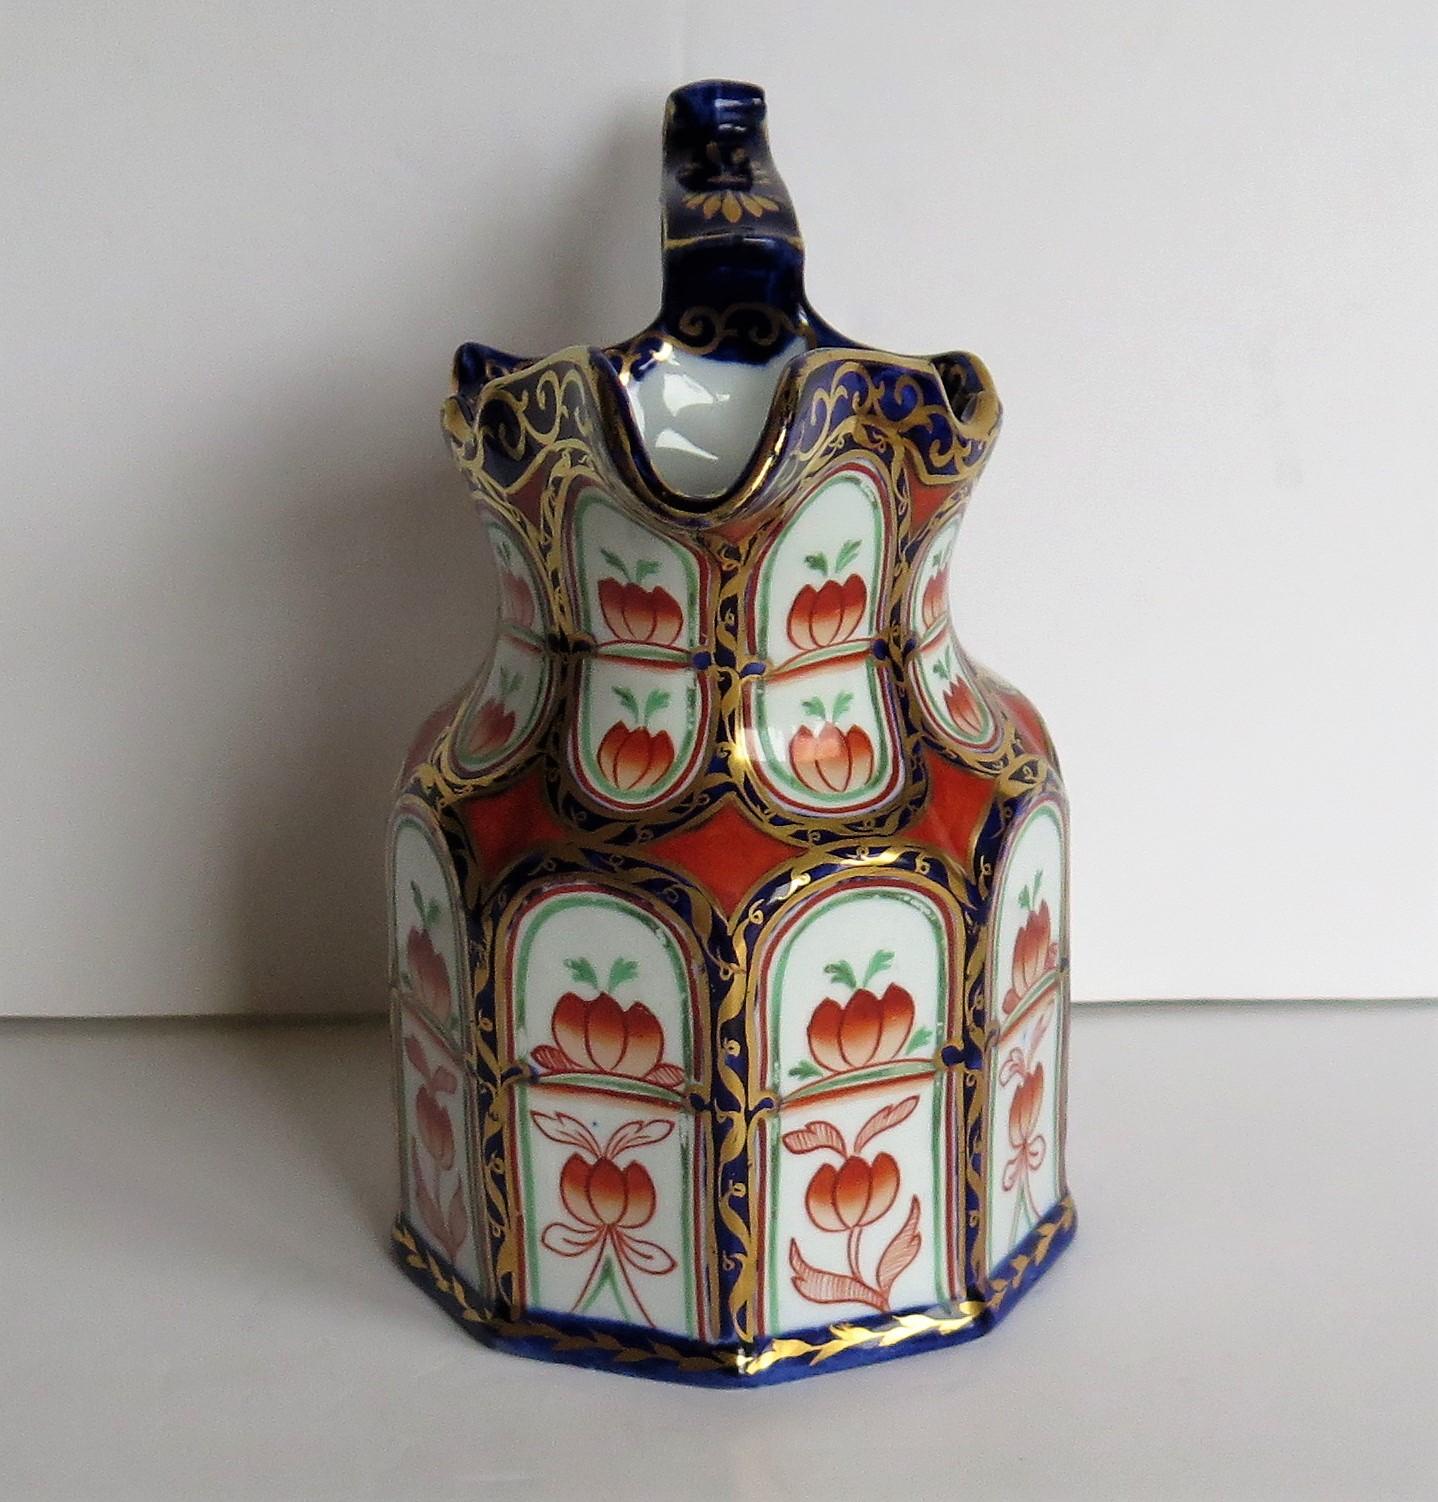 Hand-Painted Rare Mason's Ironstone Jug or Pitcher Gothic Arched Panels Hand Painted